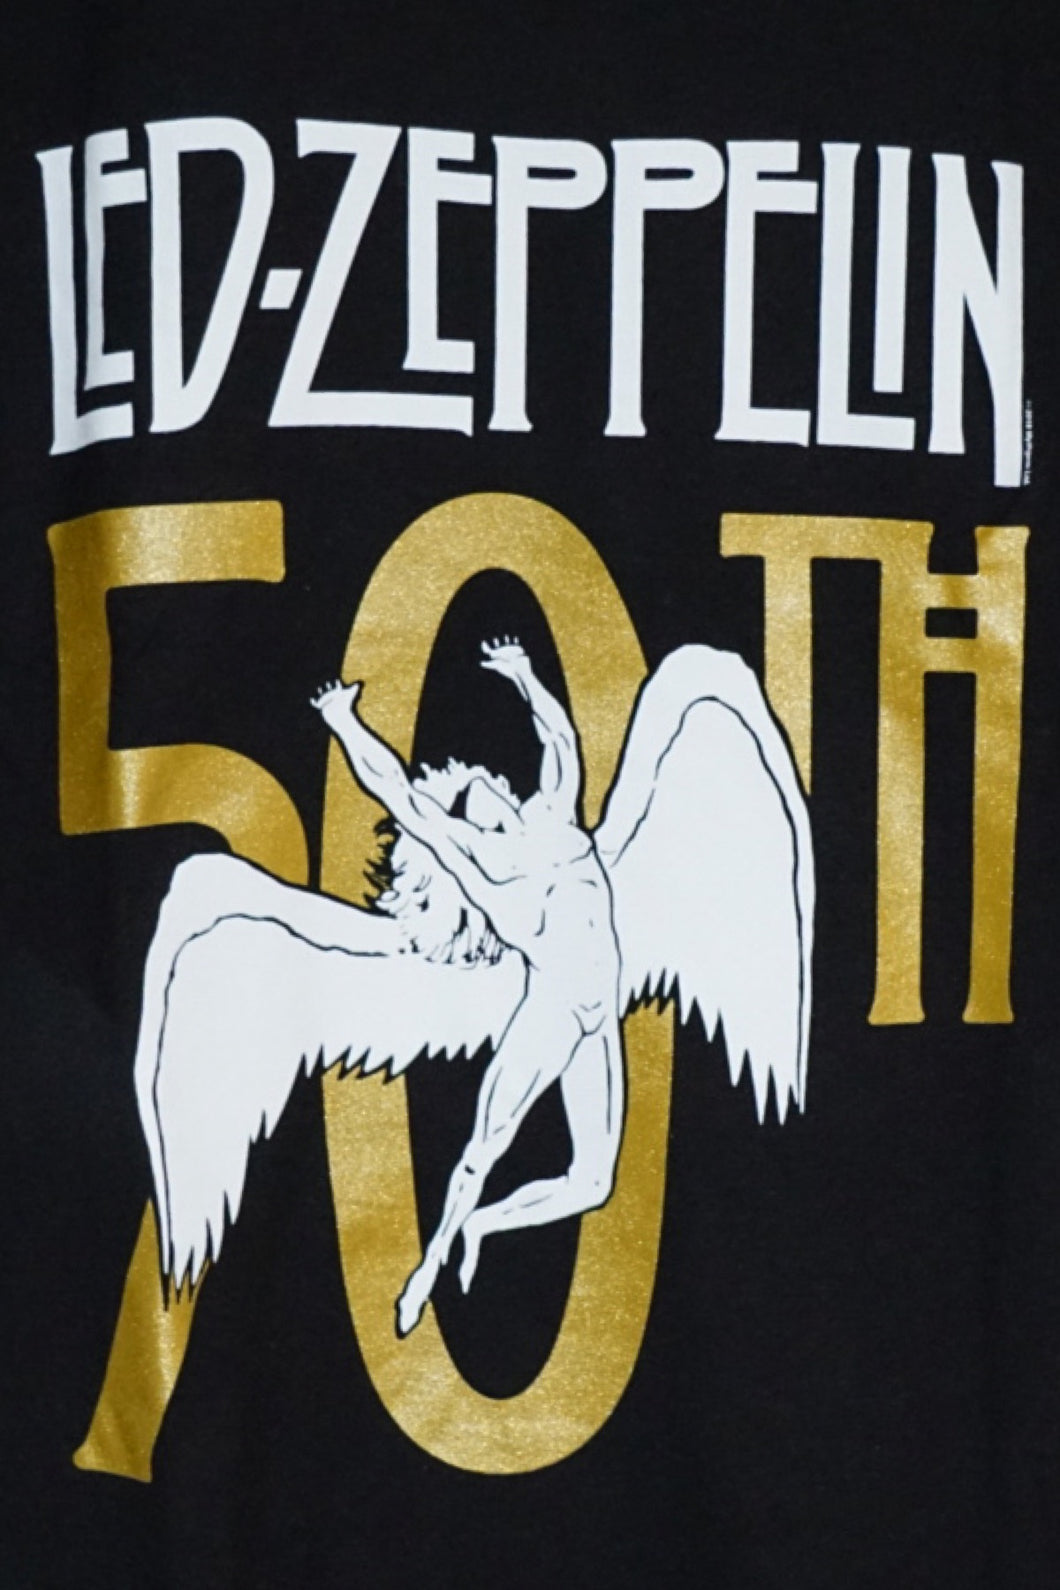 Led Zeppelin 50th Anniversary Concert Graphic Tee